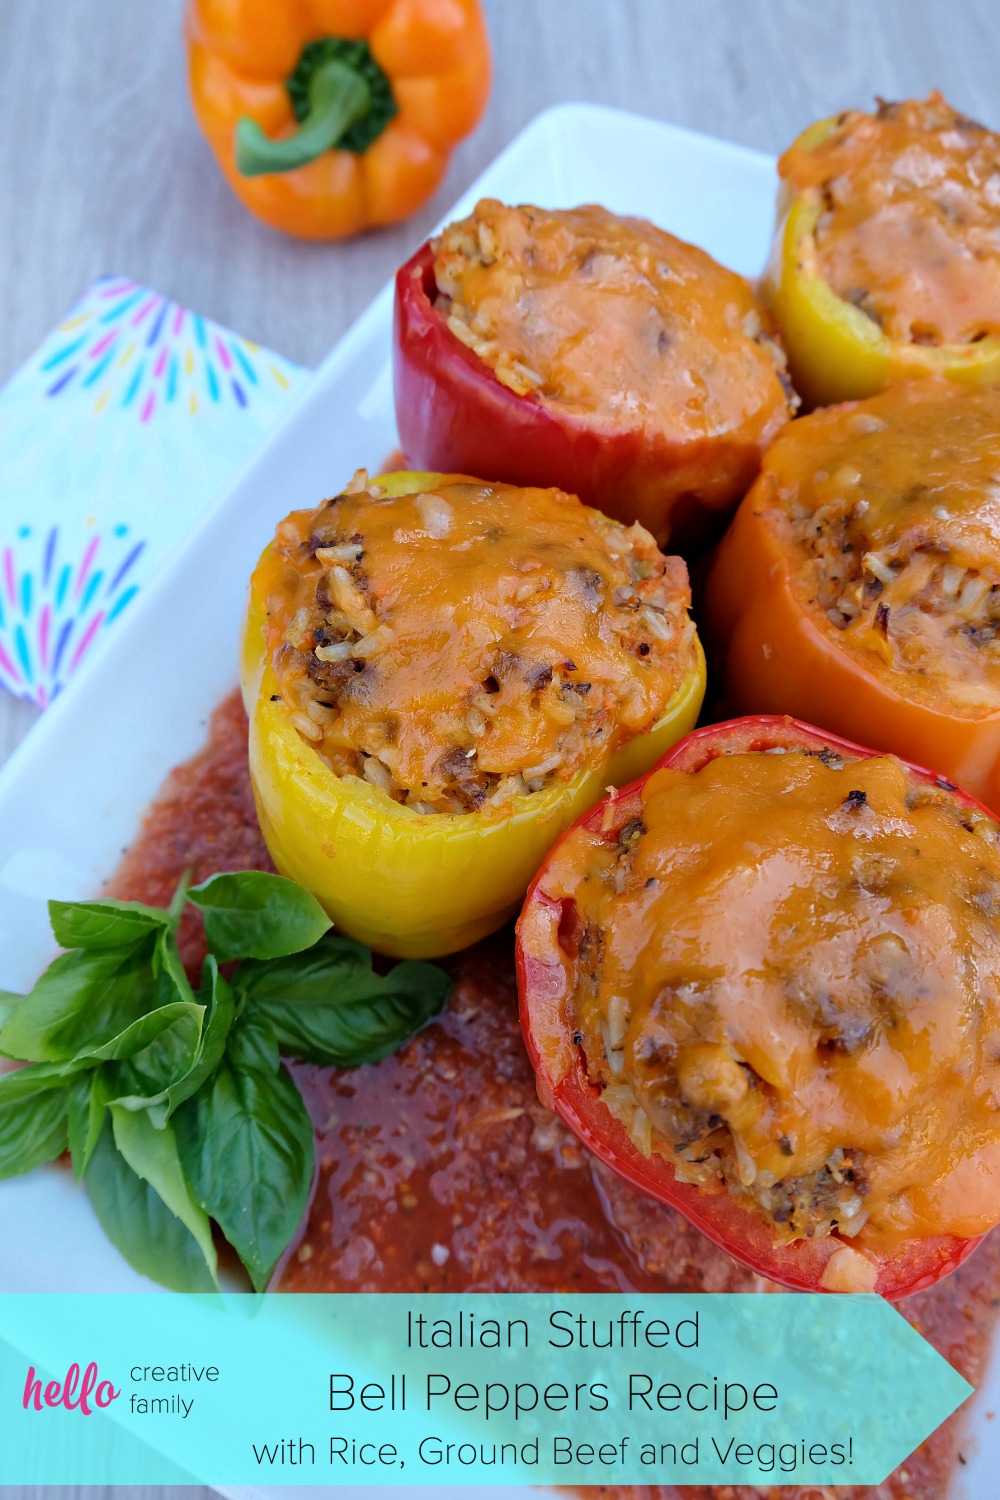 A quick and easy 30 minute weeknight meal idea! Italian Stuffed Bell Peppers Recipe with Rice, Ground Beef and Veggies! Parents will love it's packed full of hidden vegetables and kids will love the taste!